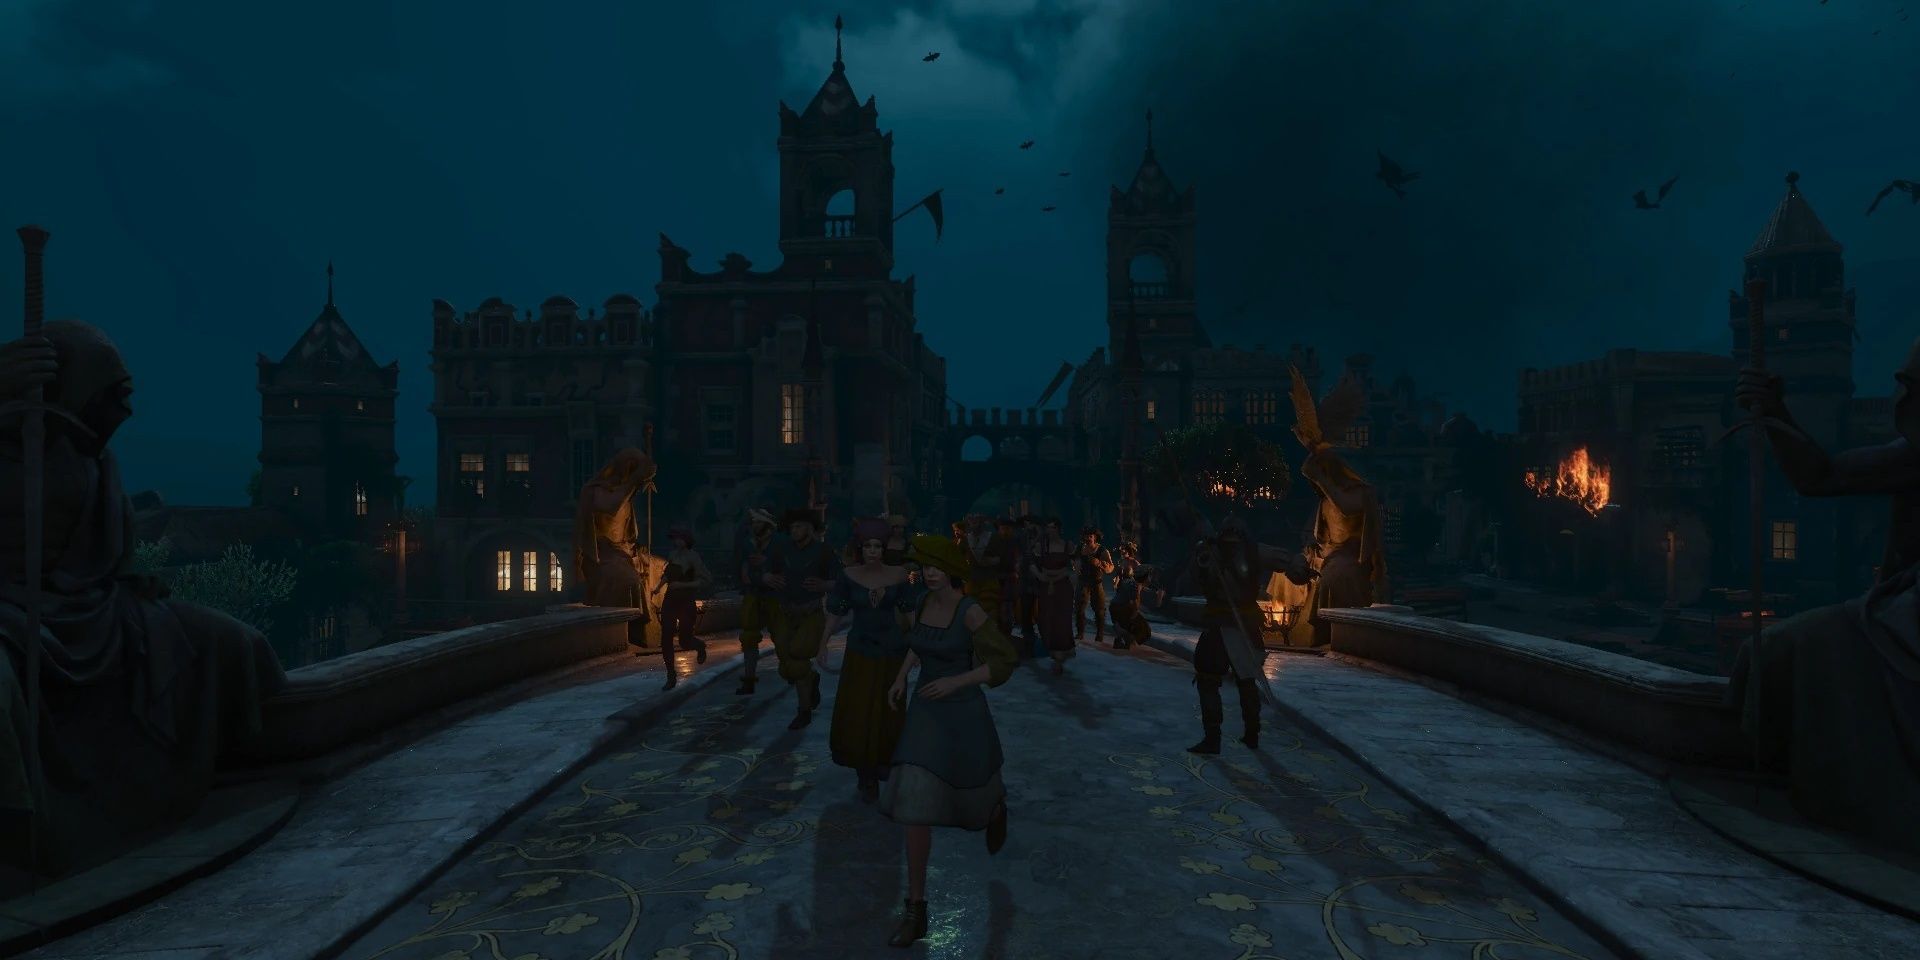 Vampire Attack From The Witcher 3